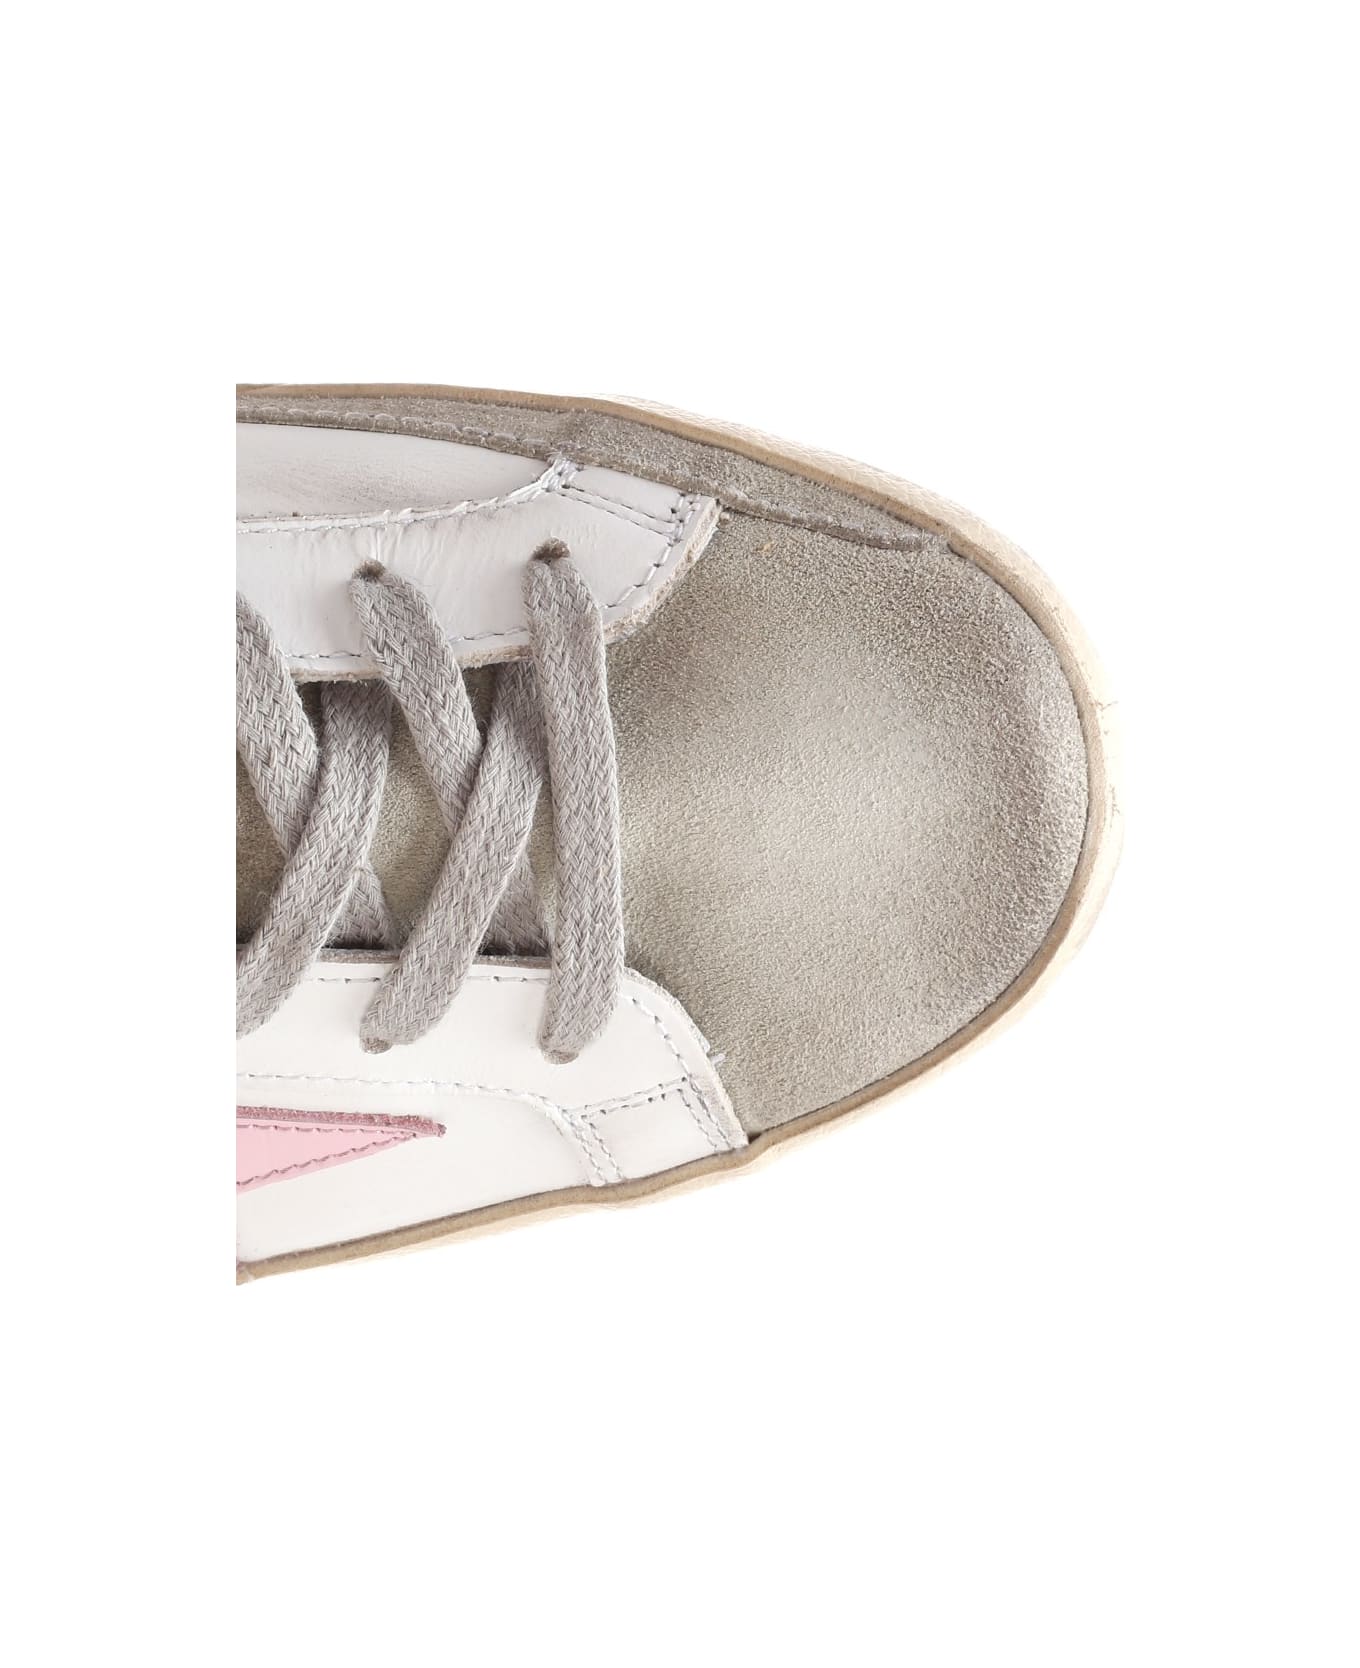 Golden Goose Super-star Leather Upper And Star Suede Toe And Spur Laminated Heel Metal Lettering - White/Ice/Orchid Pink/Silver